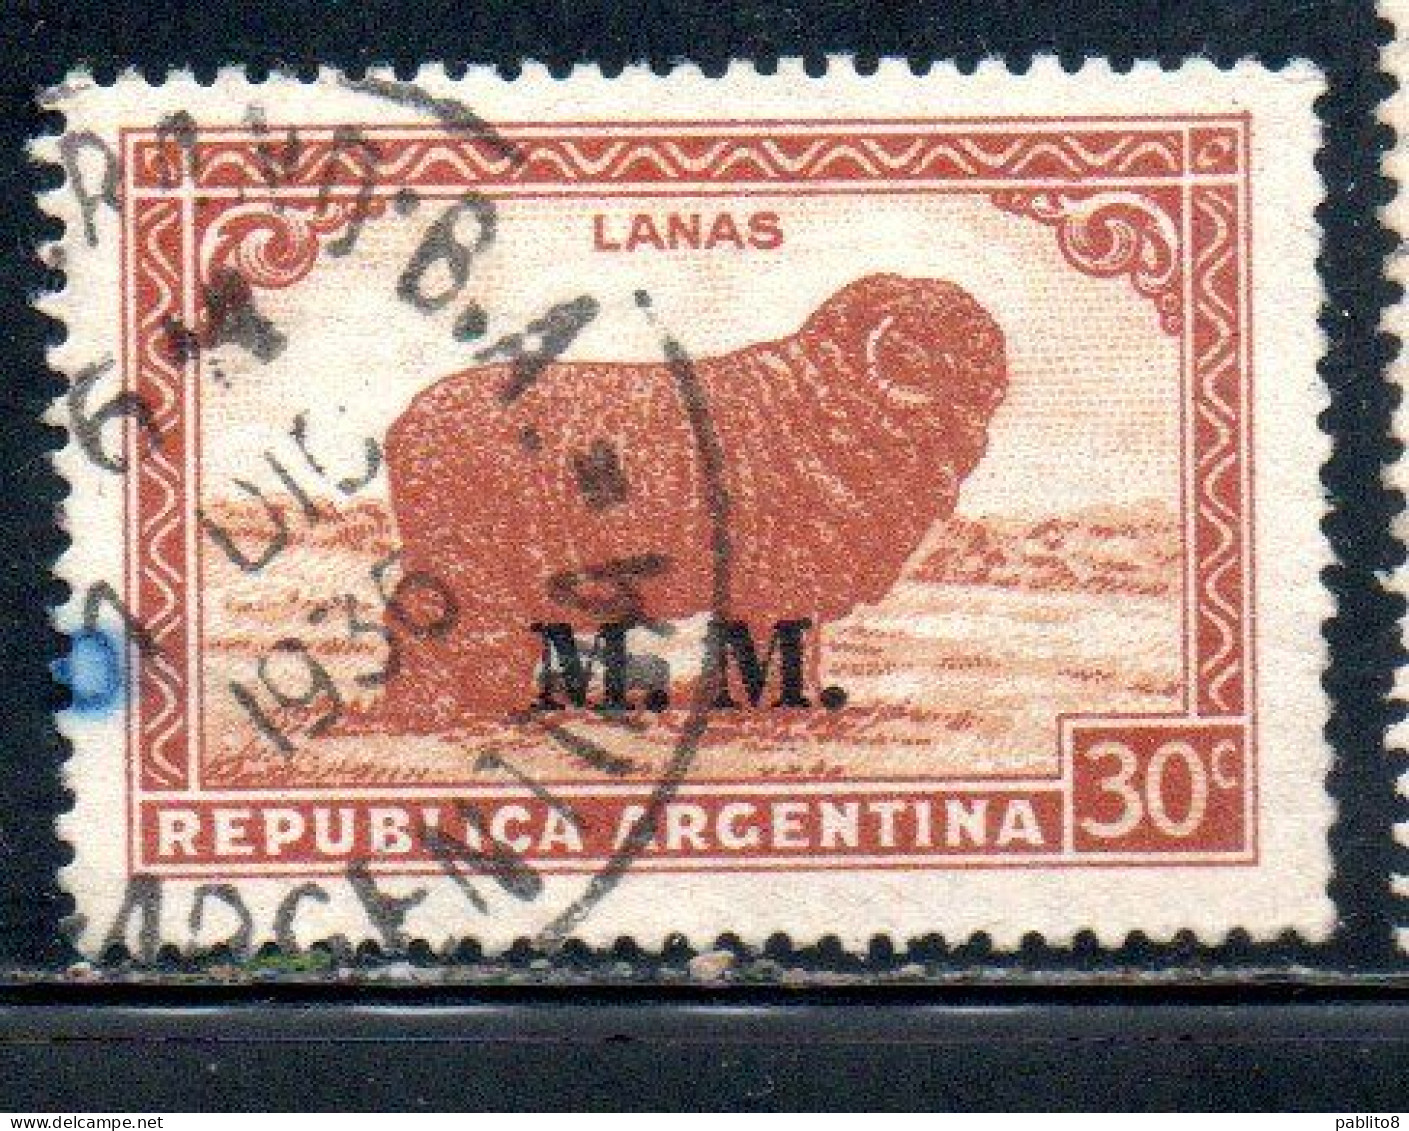 ARGENTINA 1935 1937 OFFICIAL DEPARTMENT STAMP OVERPRINTED M.M. MINISTRY OF MARINE MM 30c USED USADO - Servizio